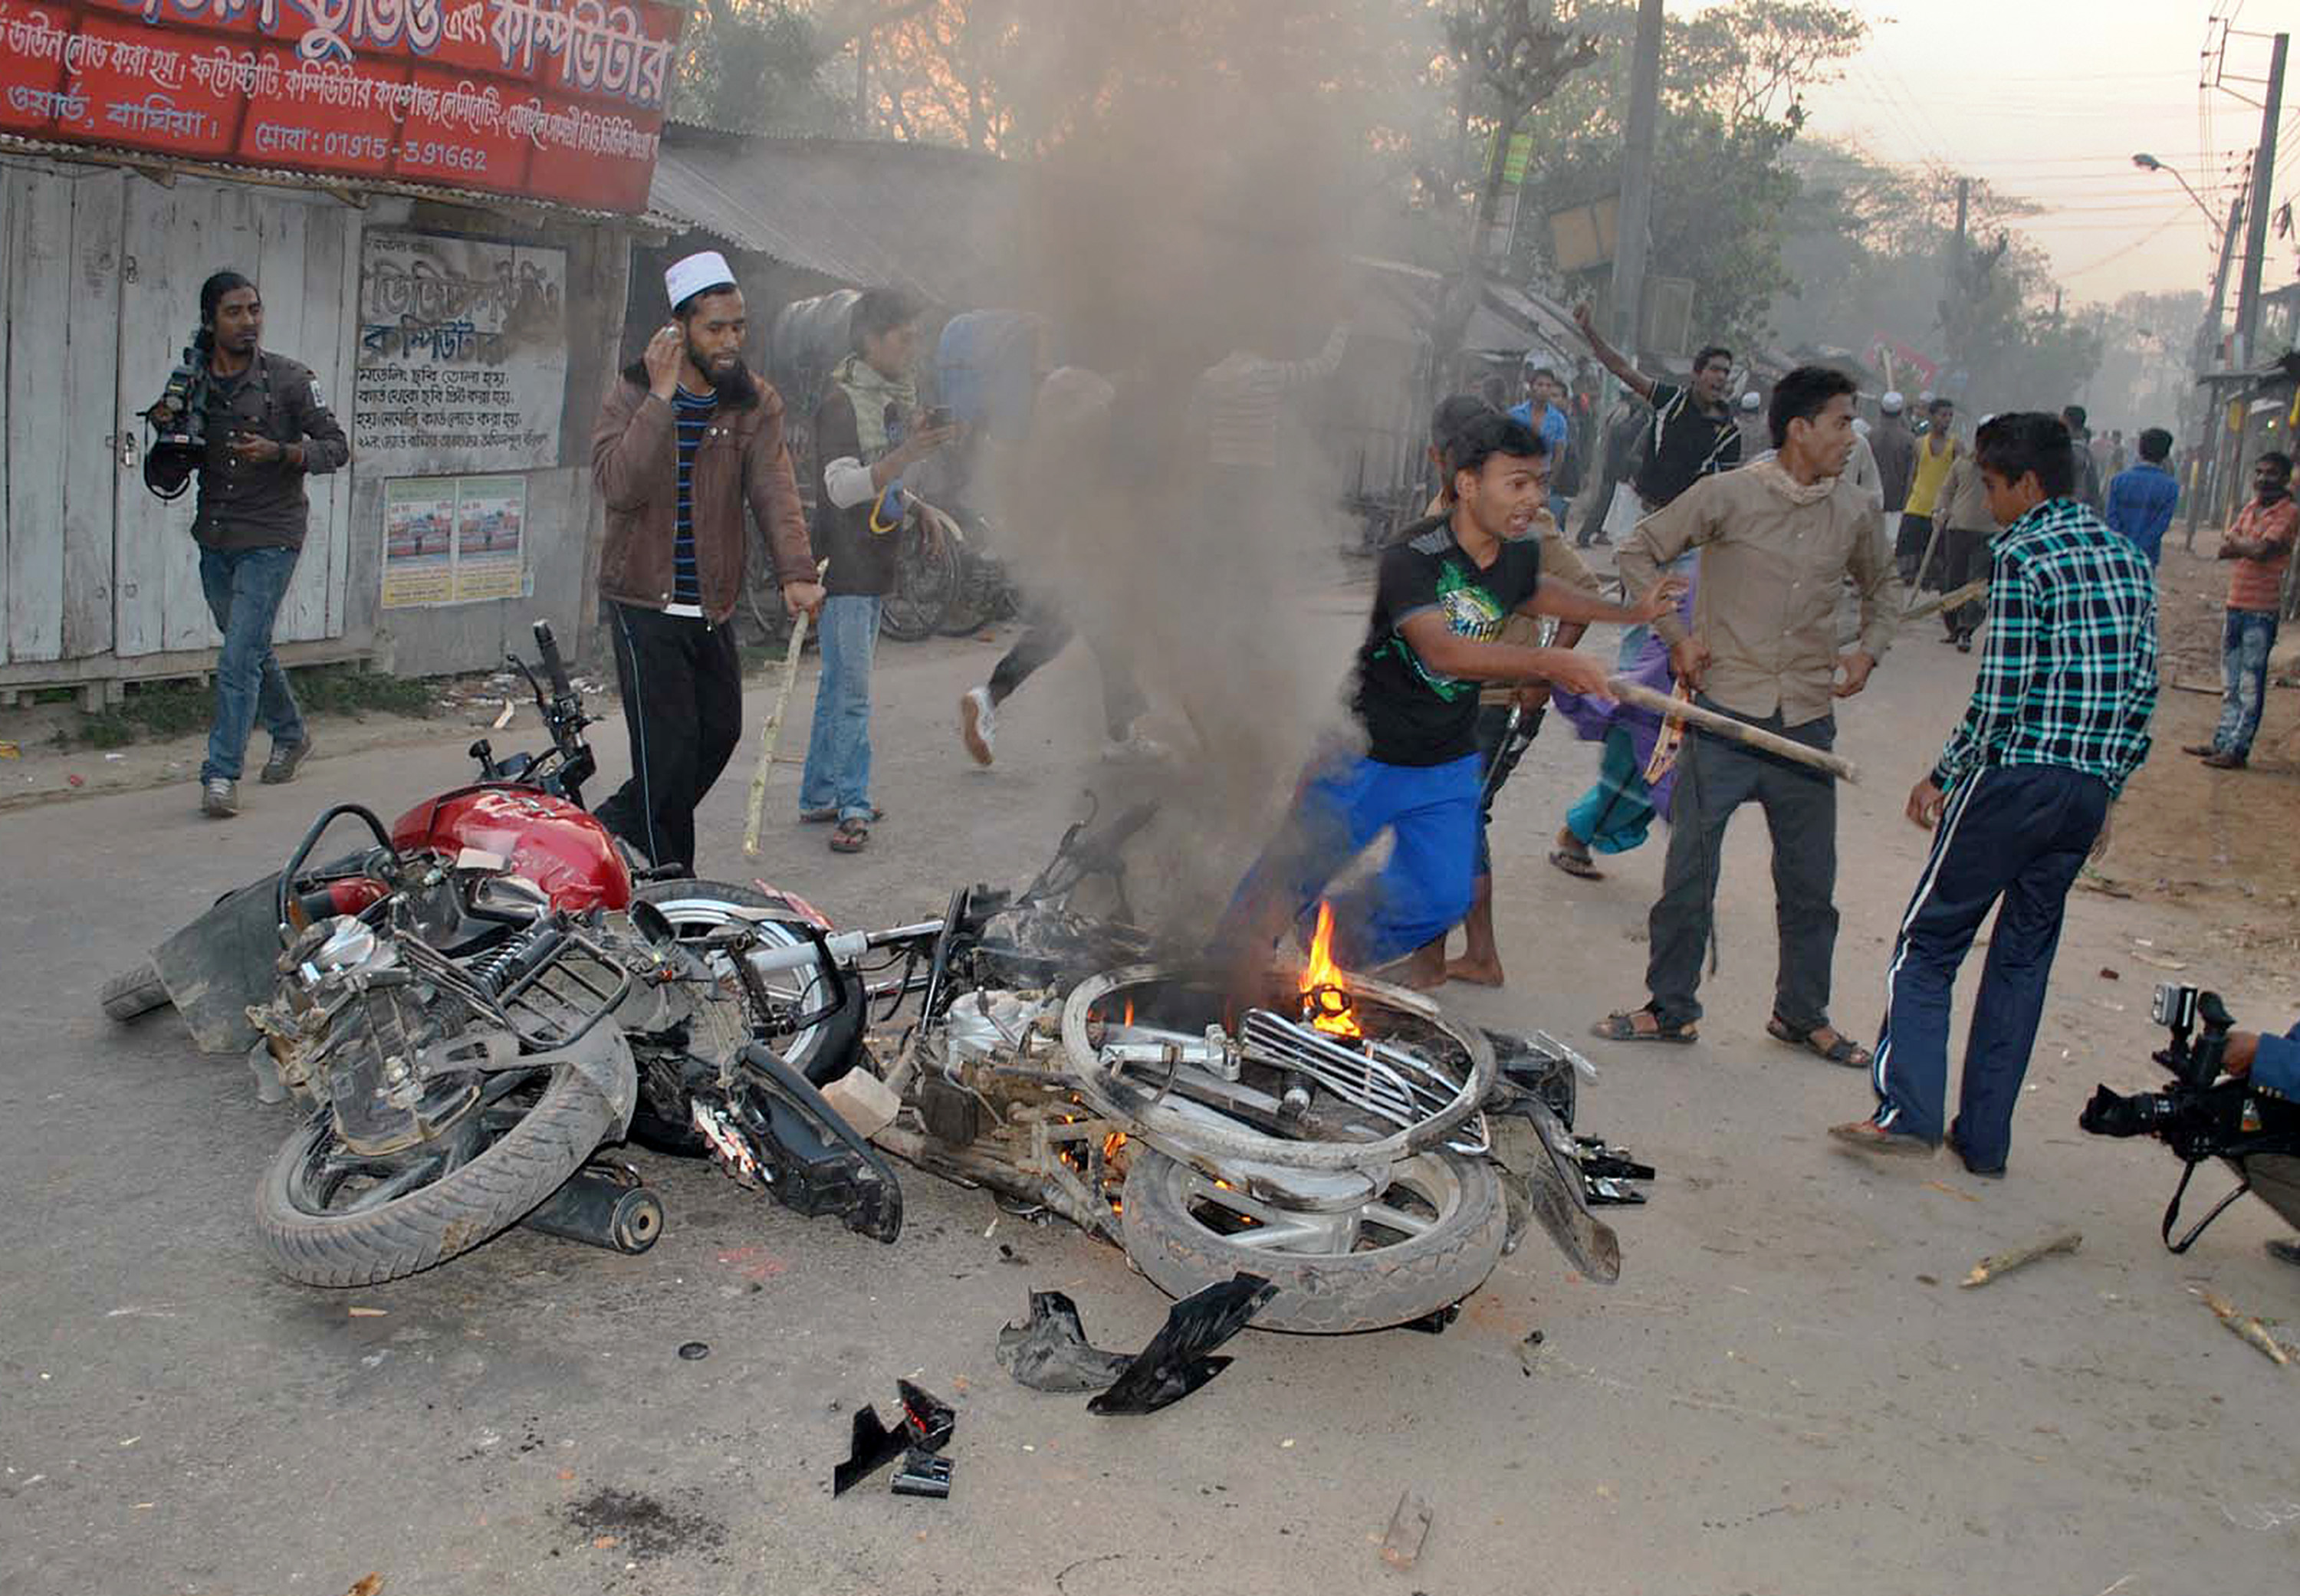  Bangladeshi Islamist activists vandalise motor bikes in Barisal, some 142 kms south the capital Dhaka on March 4, 2013 during a nationwide strike called by Jamaat-e-Islami and protesting the war crimes verdicts.  AFP PHOTO